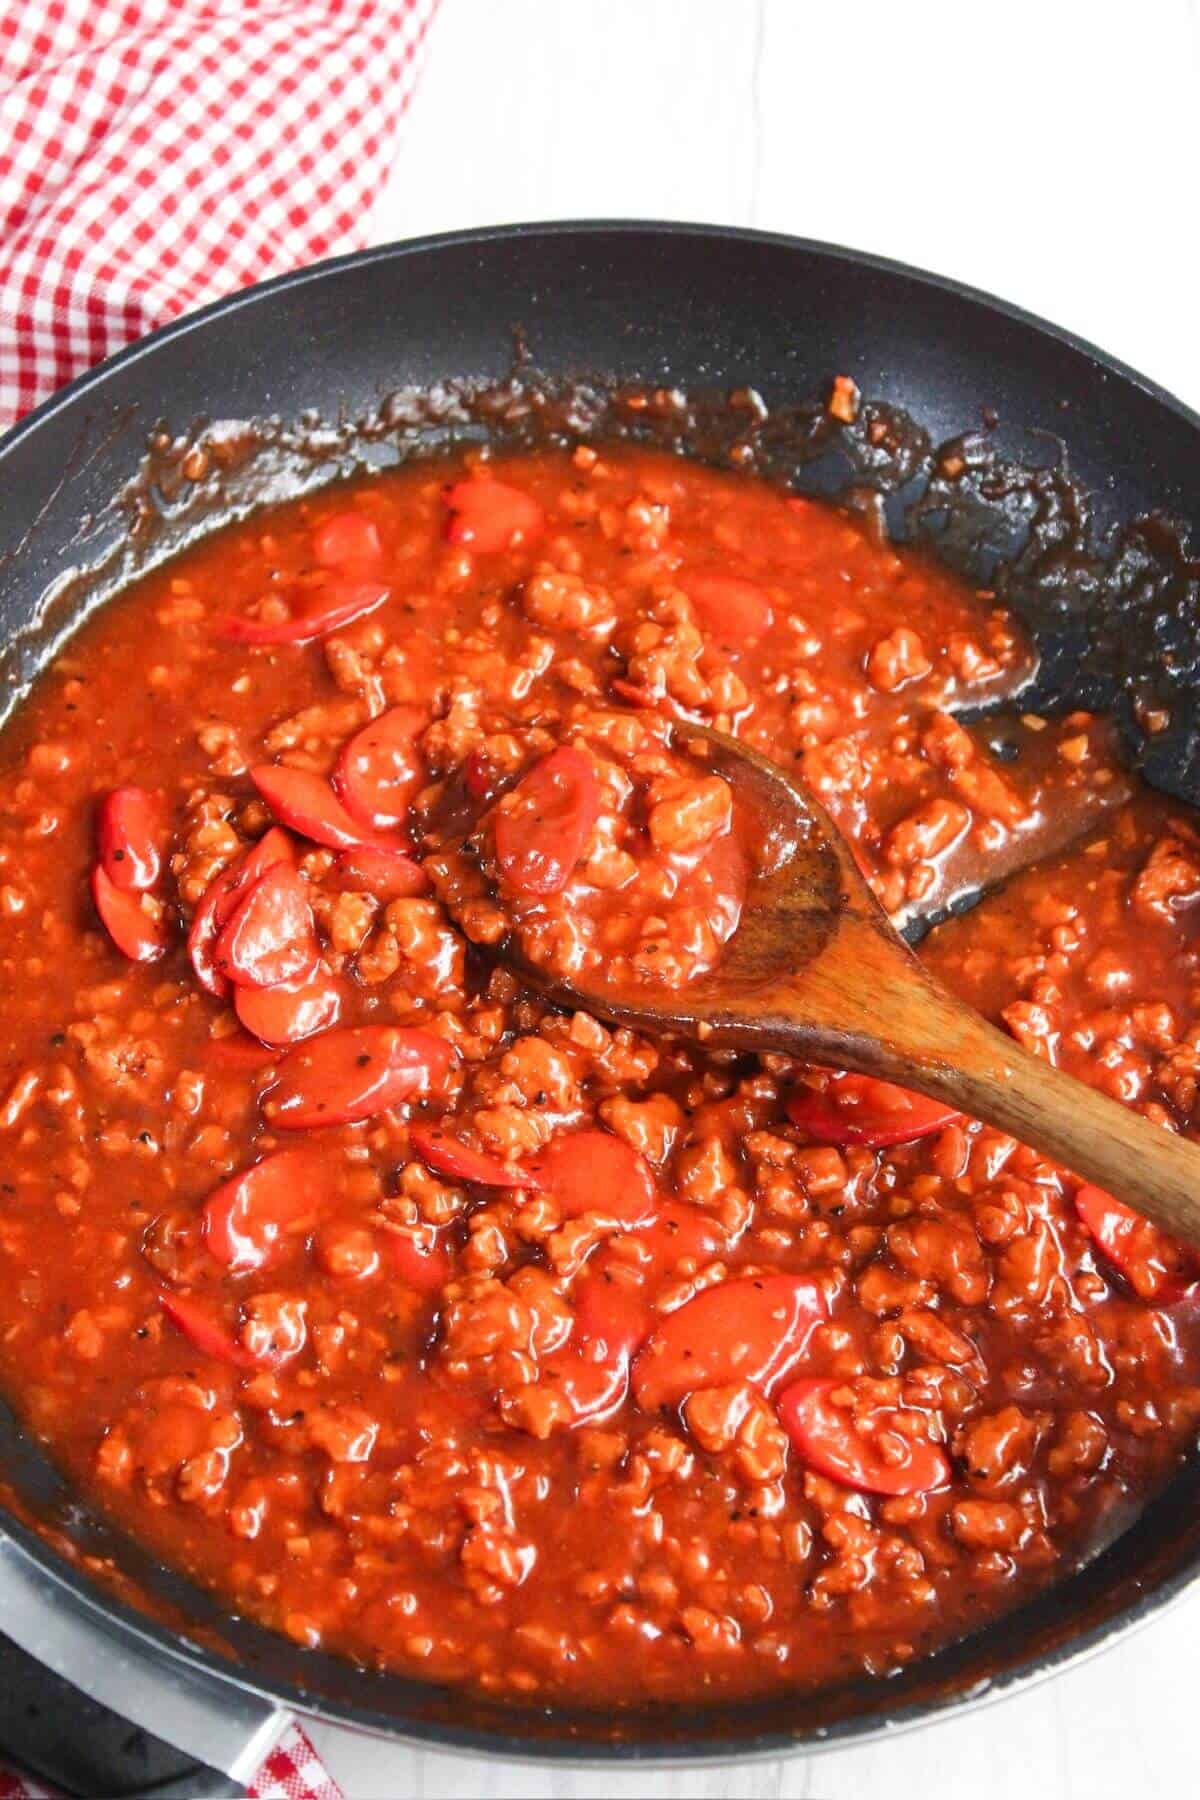 A frying pan filled with ground meat and tomato sauce.